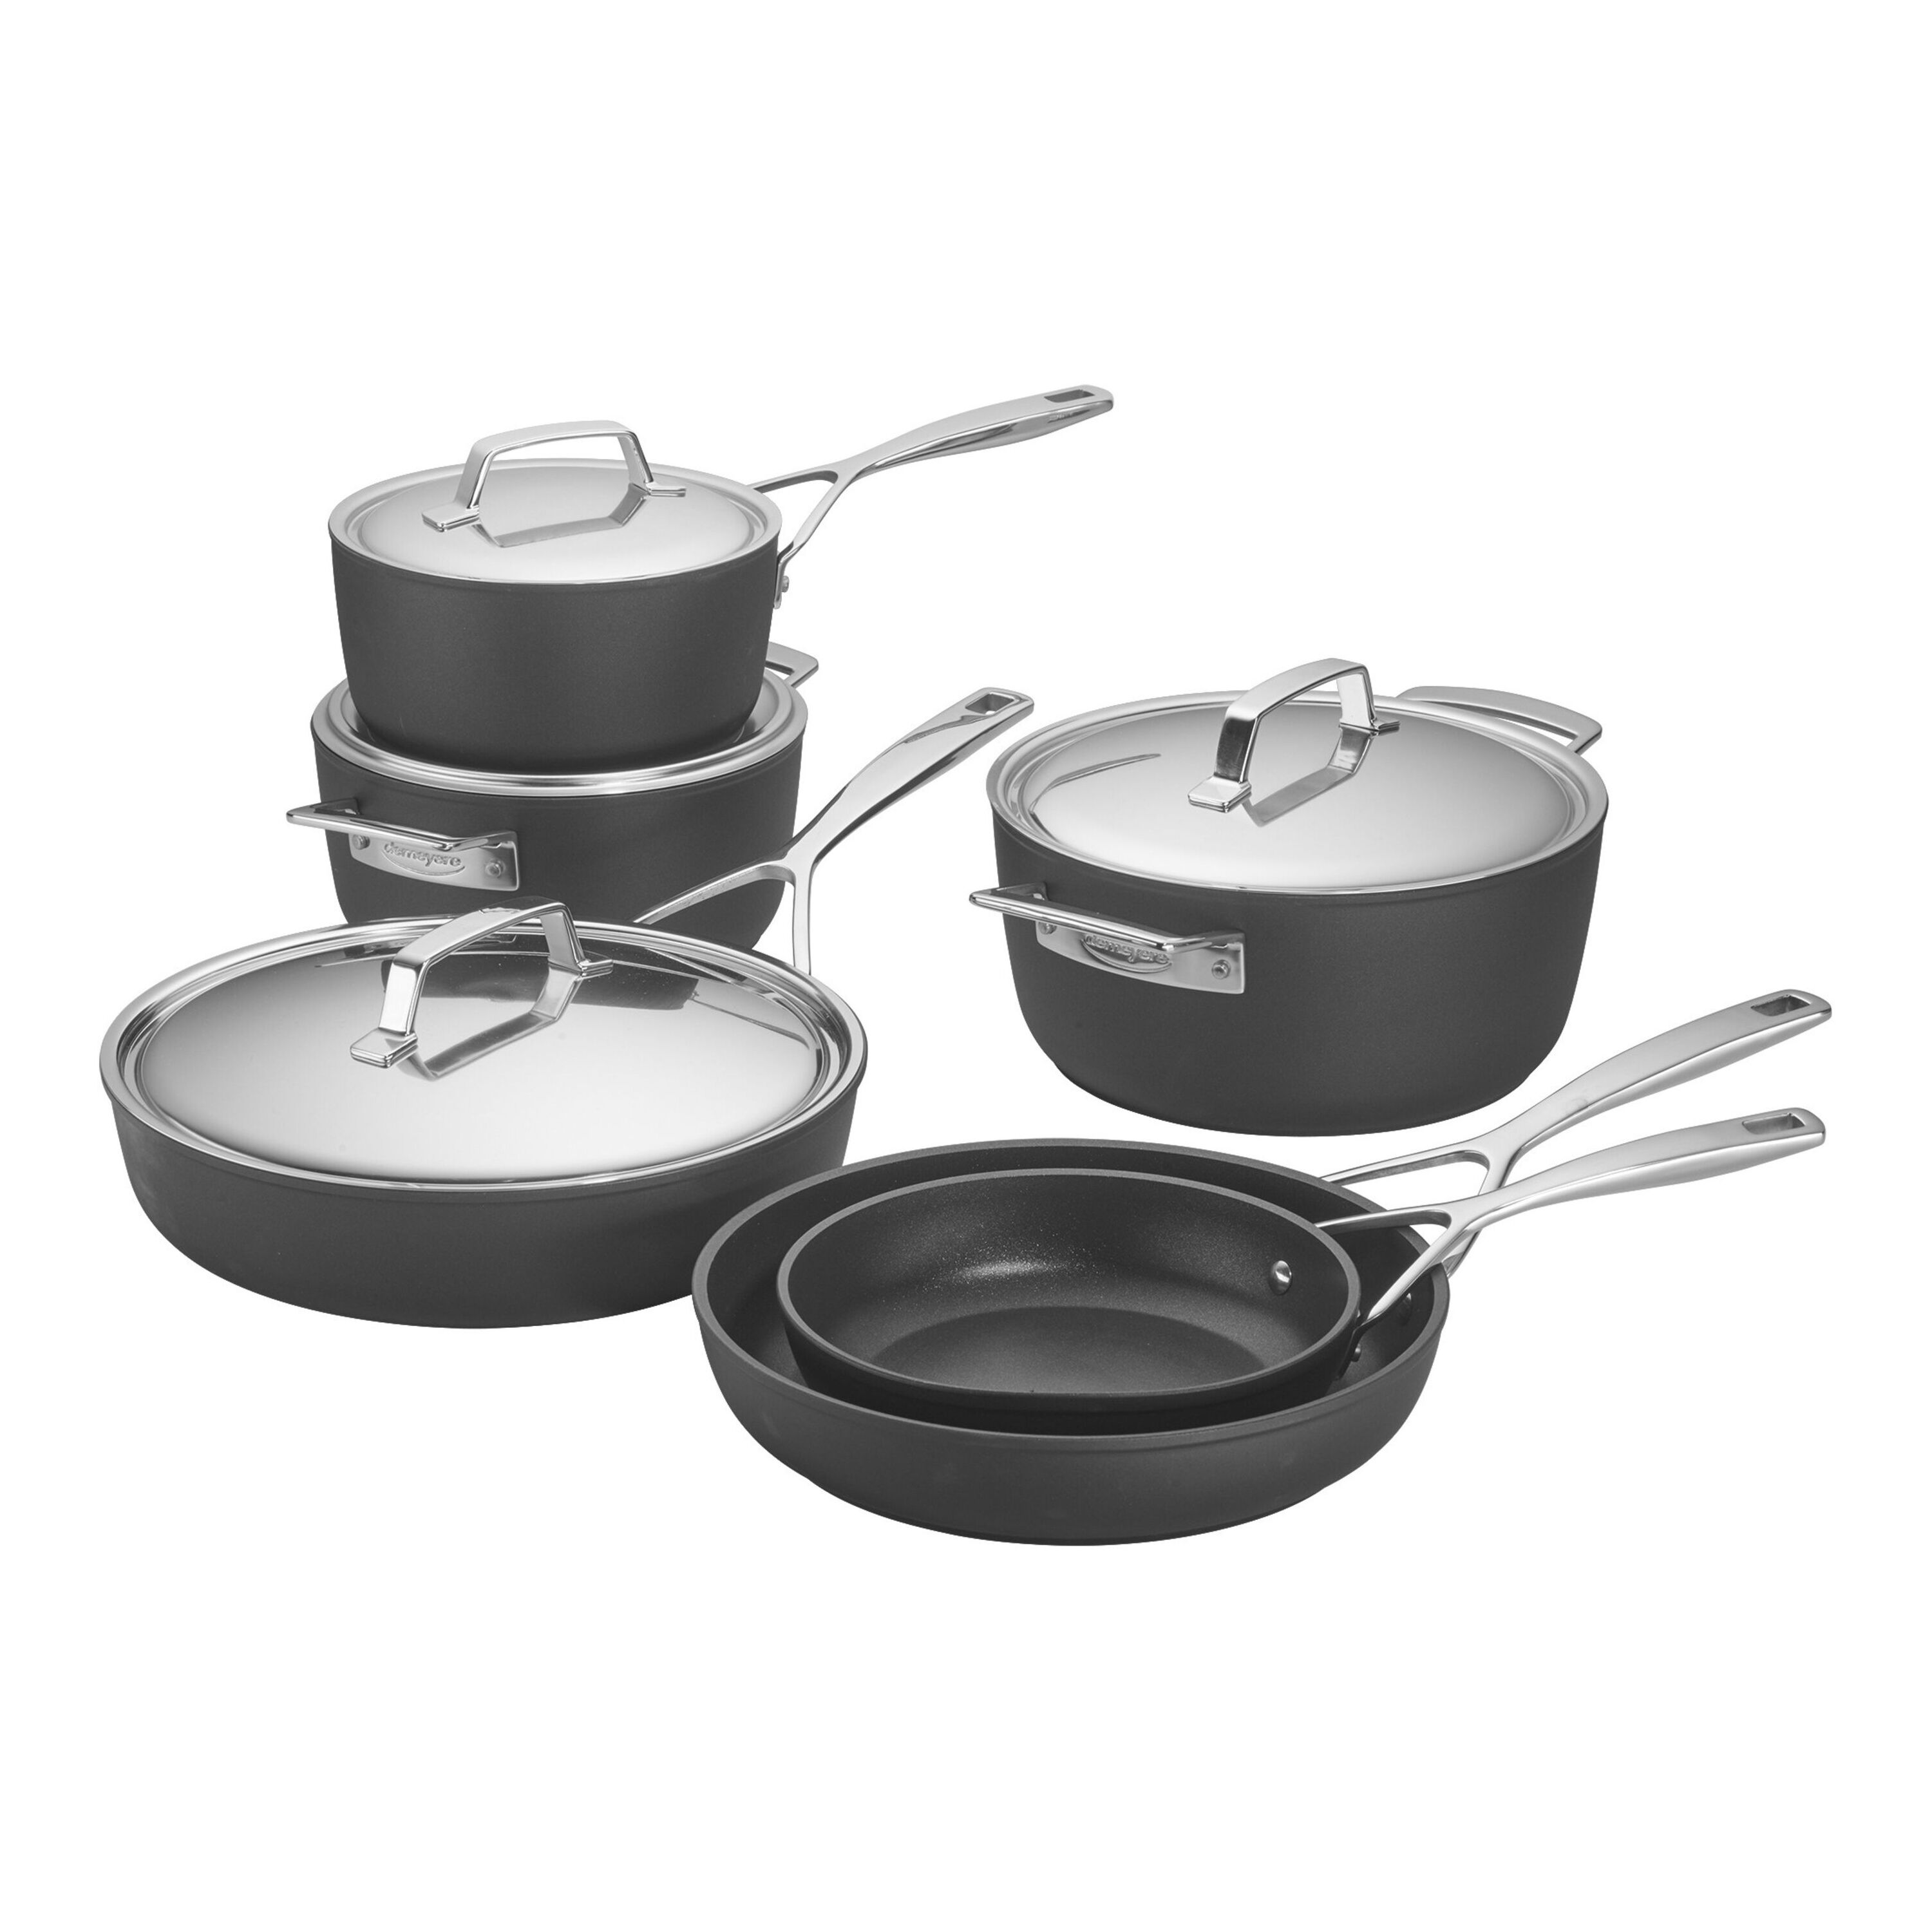 Zwilling ZWILLING Clad Xtreme 10-Pc Aluminum Nonstick Cookware Set - Black  - 5 requests